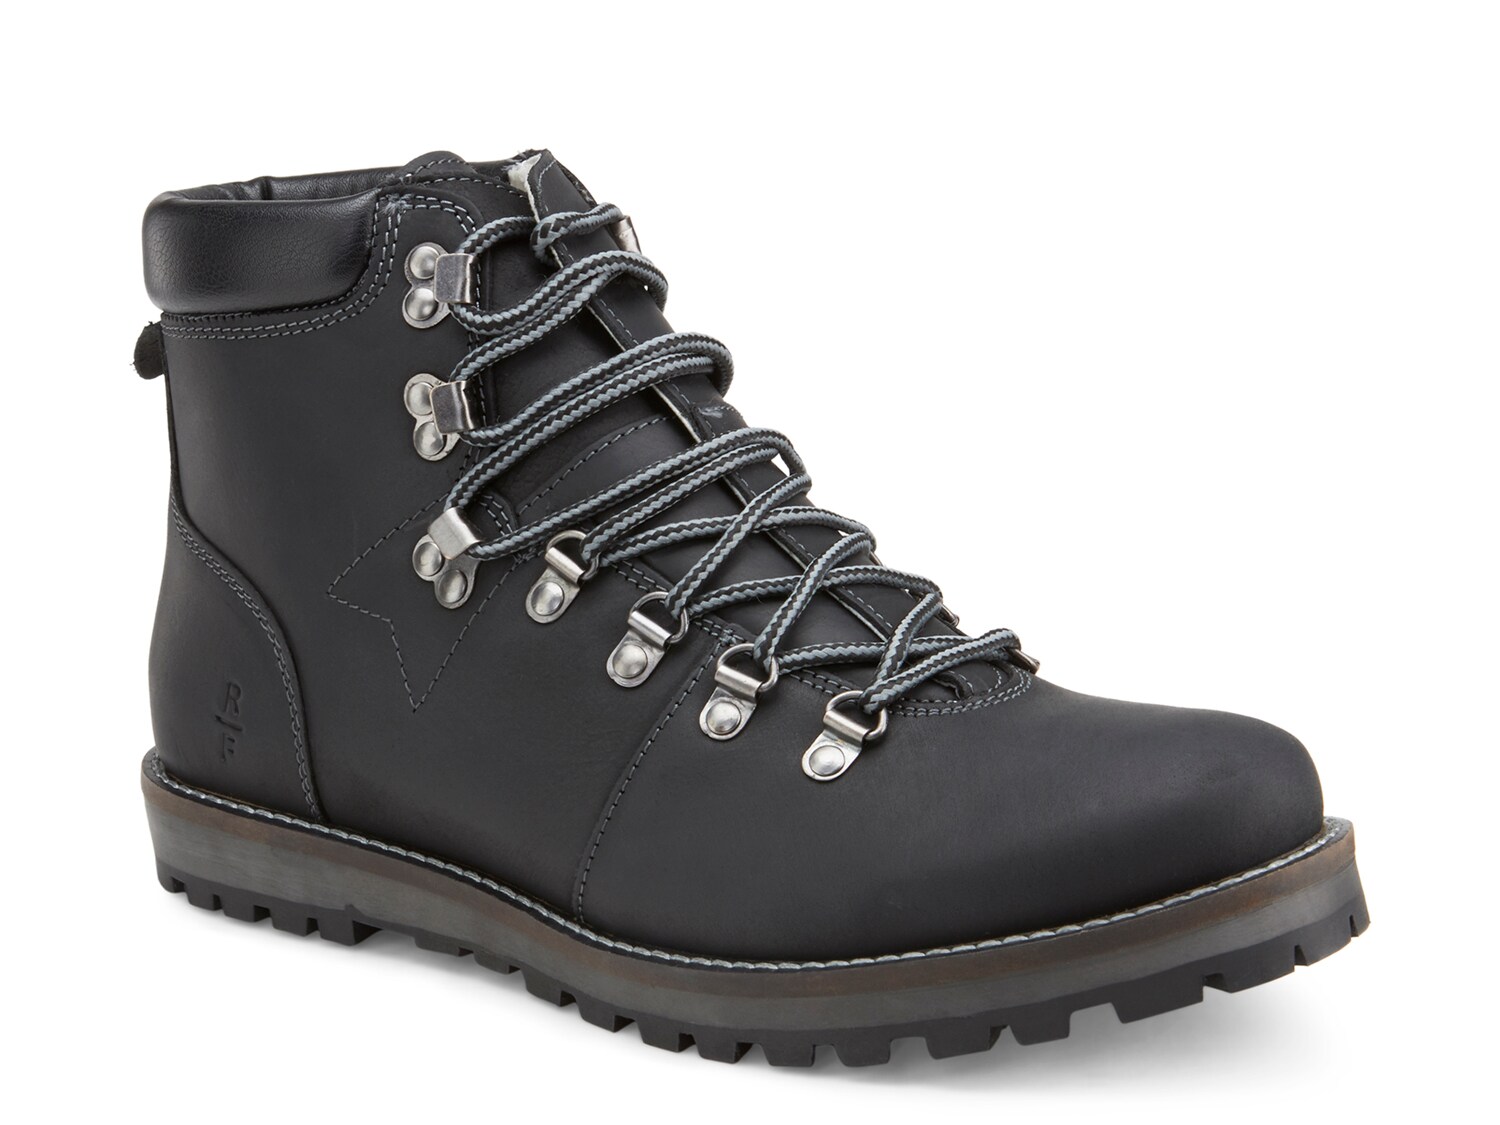 Reserved Footwear Barna Boot - Free Shipping | DSW